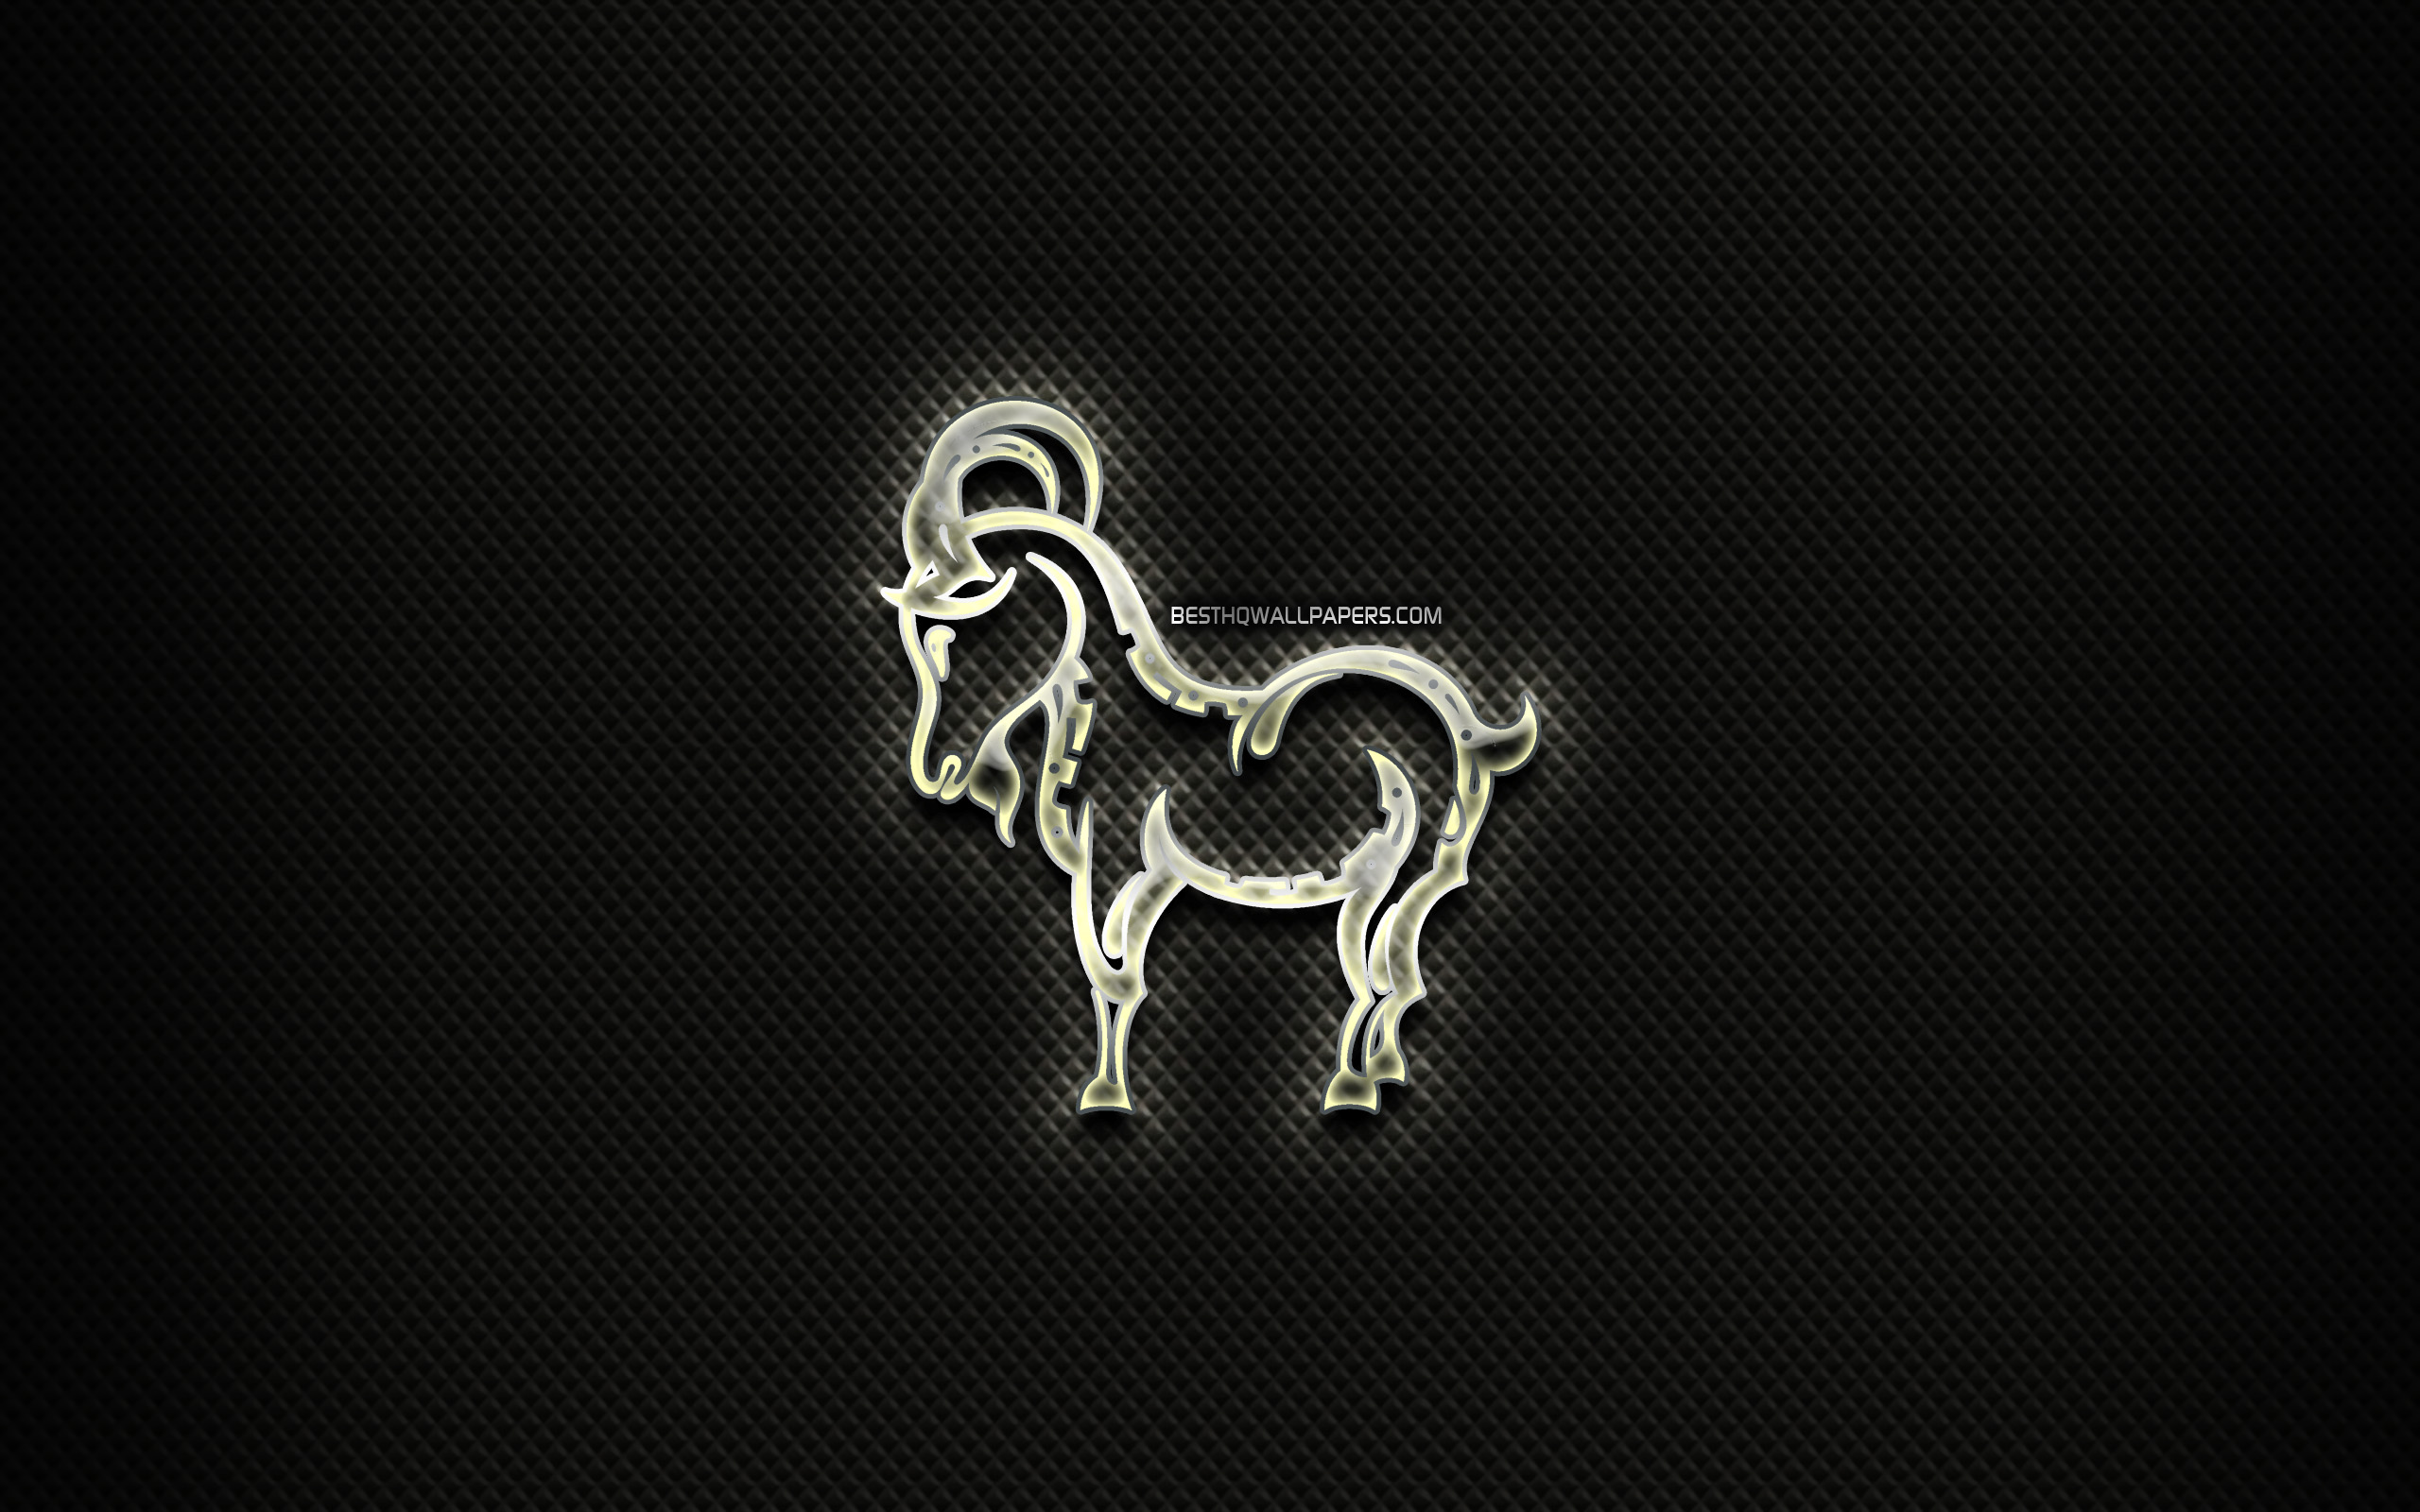 Download wallpaper Goat glass sign, chinese zodiac, black abstact background, Chinese calendar, artwork, Goat zodiac sign, animals signs, Goat, Chinese Zodiac Signs, creative, Goat zodiac for desktop with resolution 2560x1600. High Quality